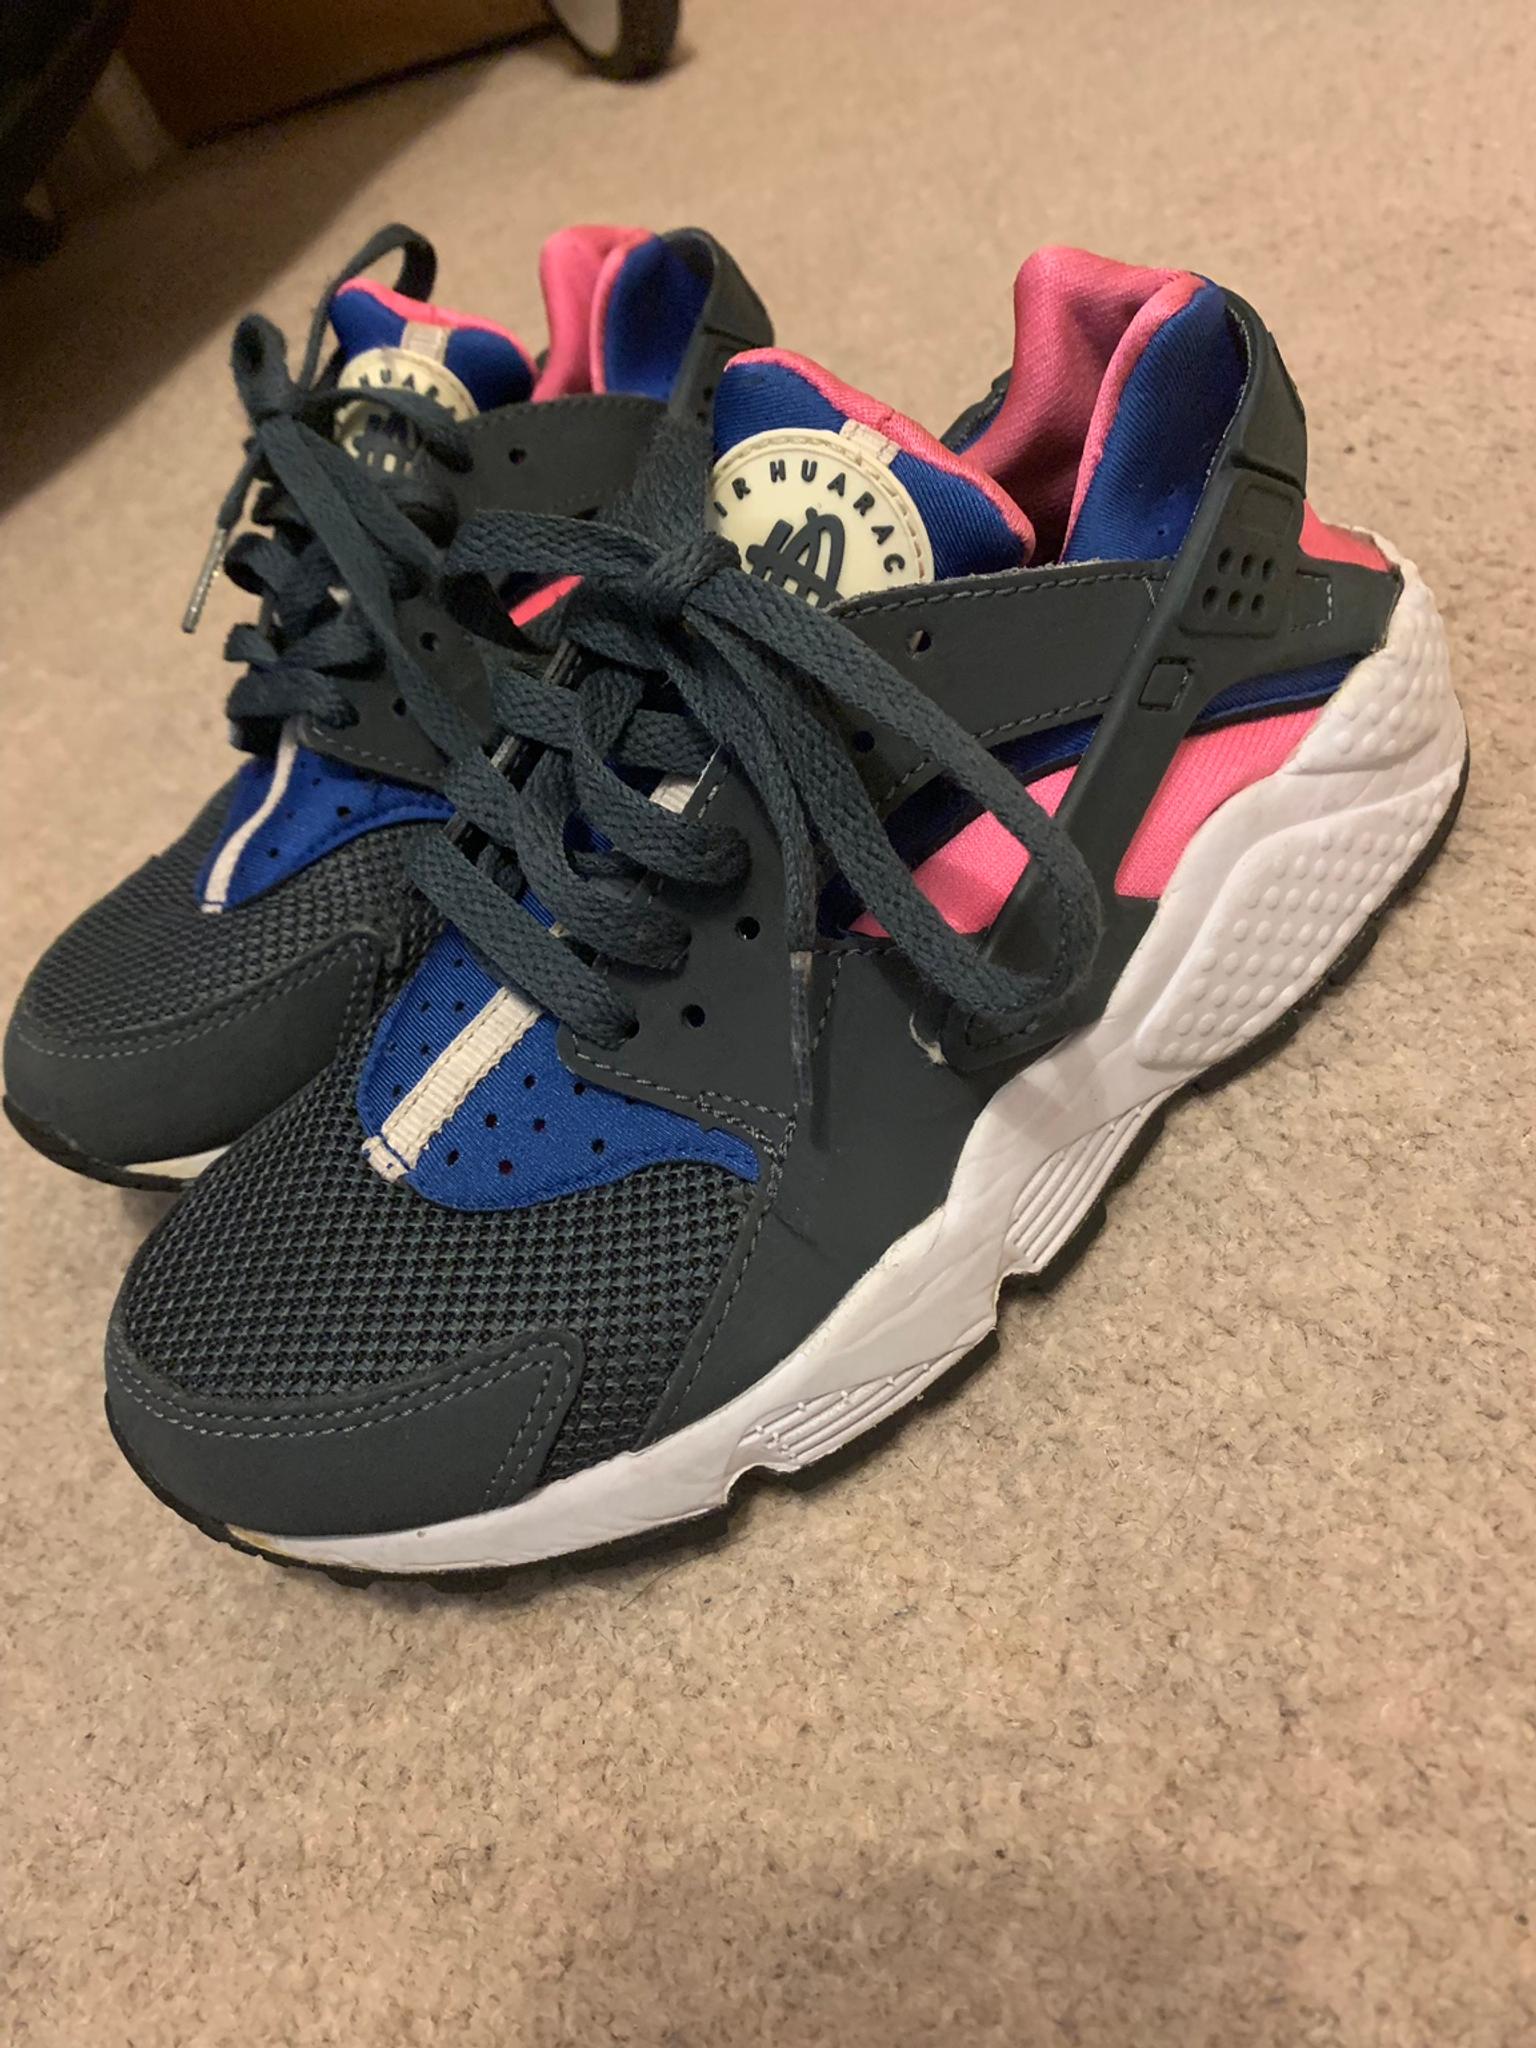 huaraches pink and blue